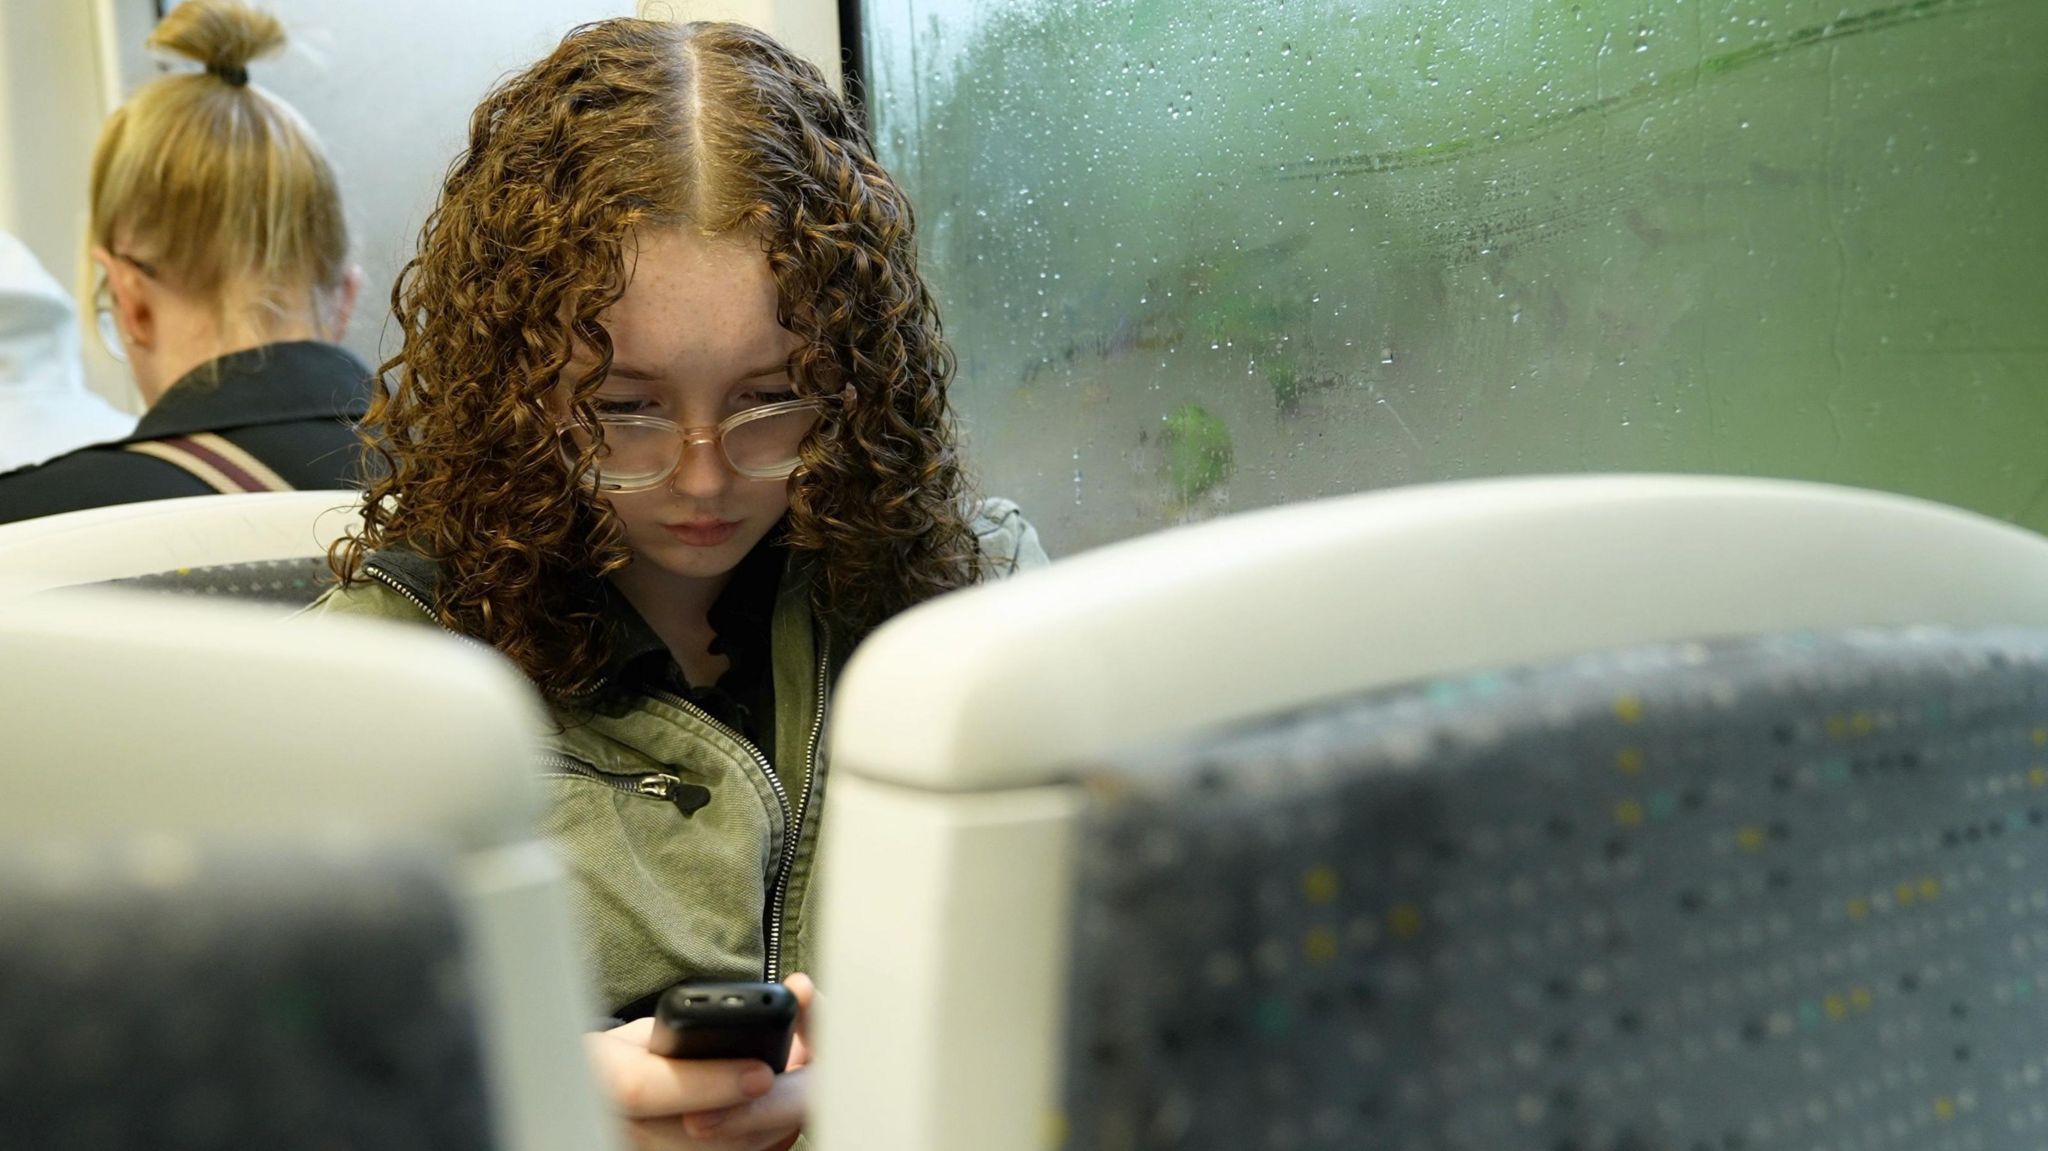 Ruby, wearing a green coat, stares down at her brickphone as she sits on a tram to college